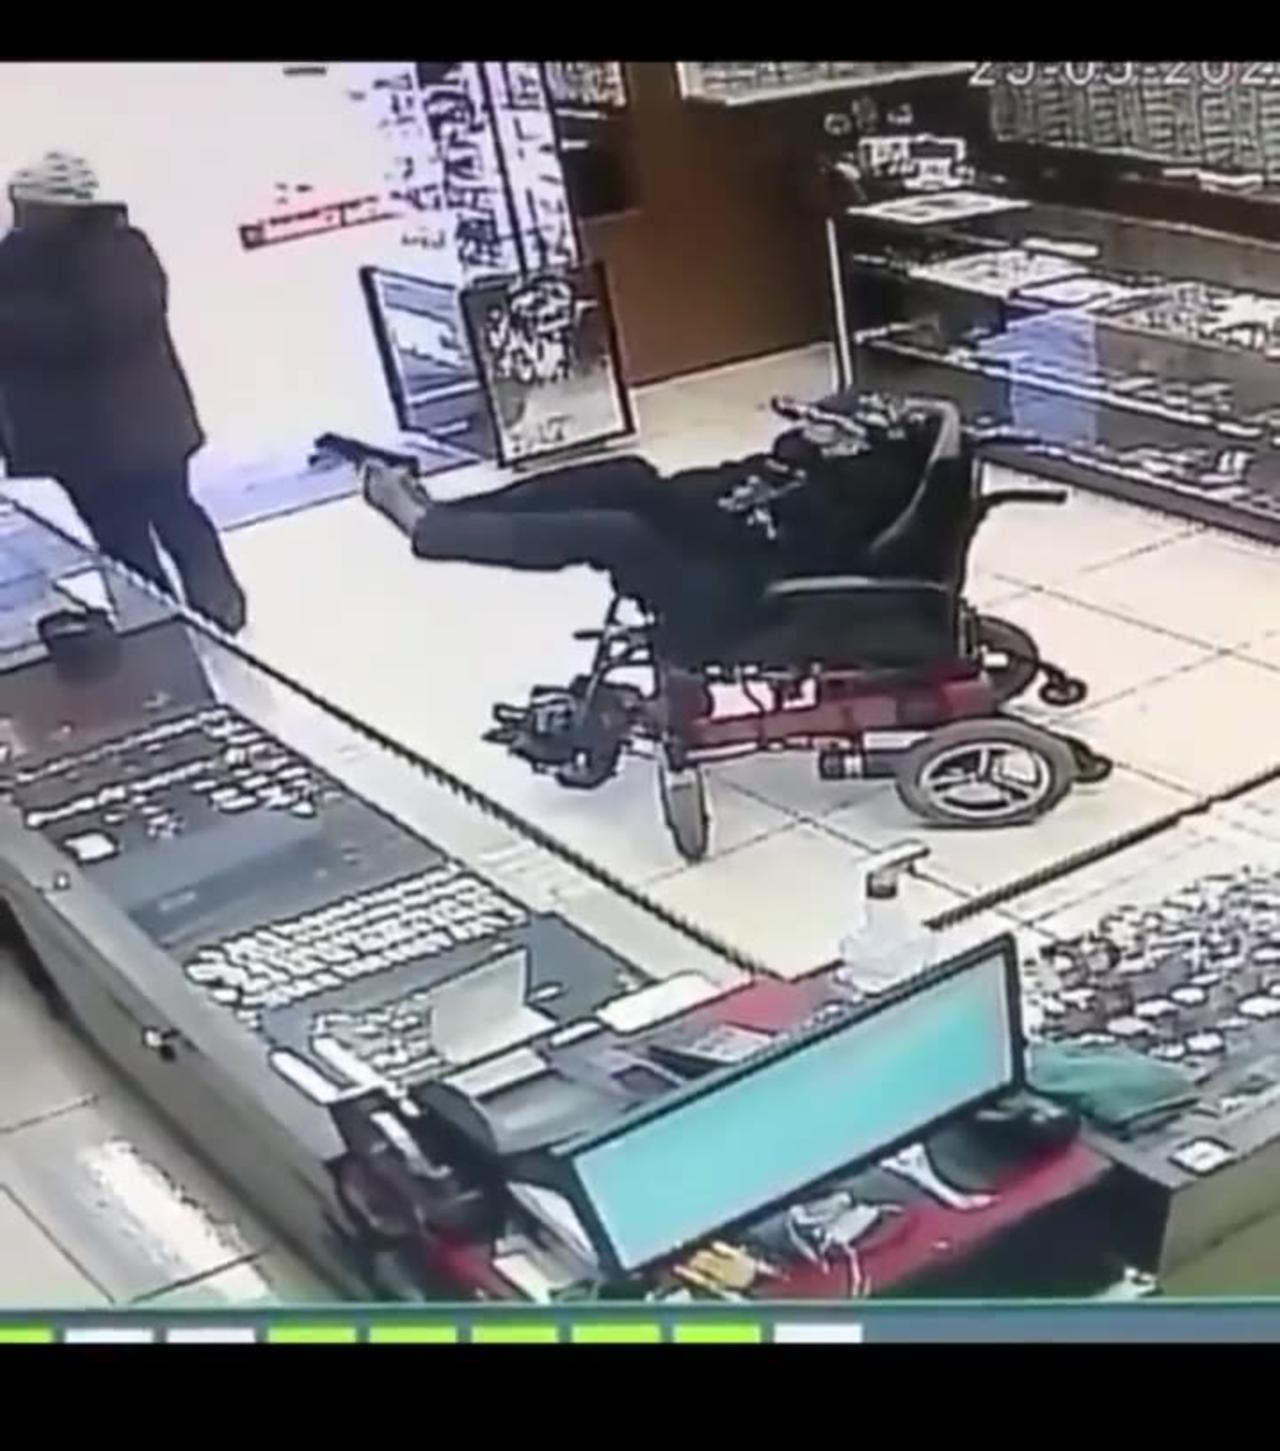 Man with no arms commits armed robbery